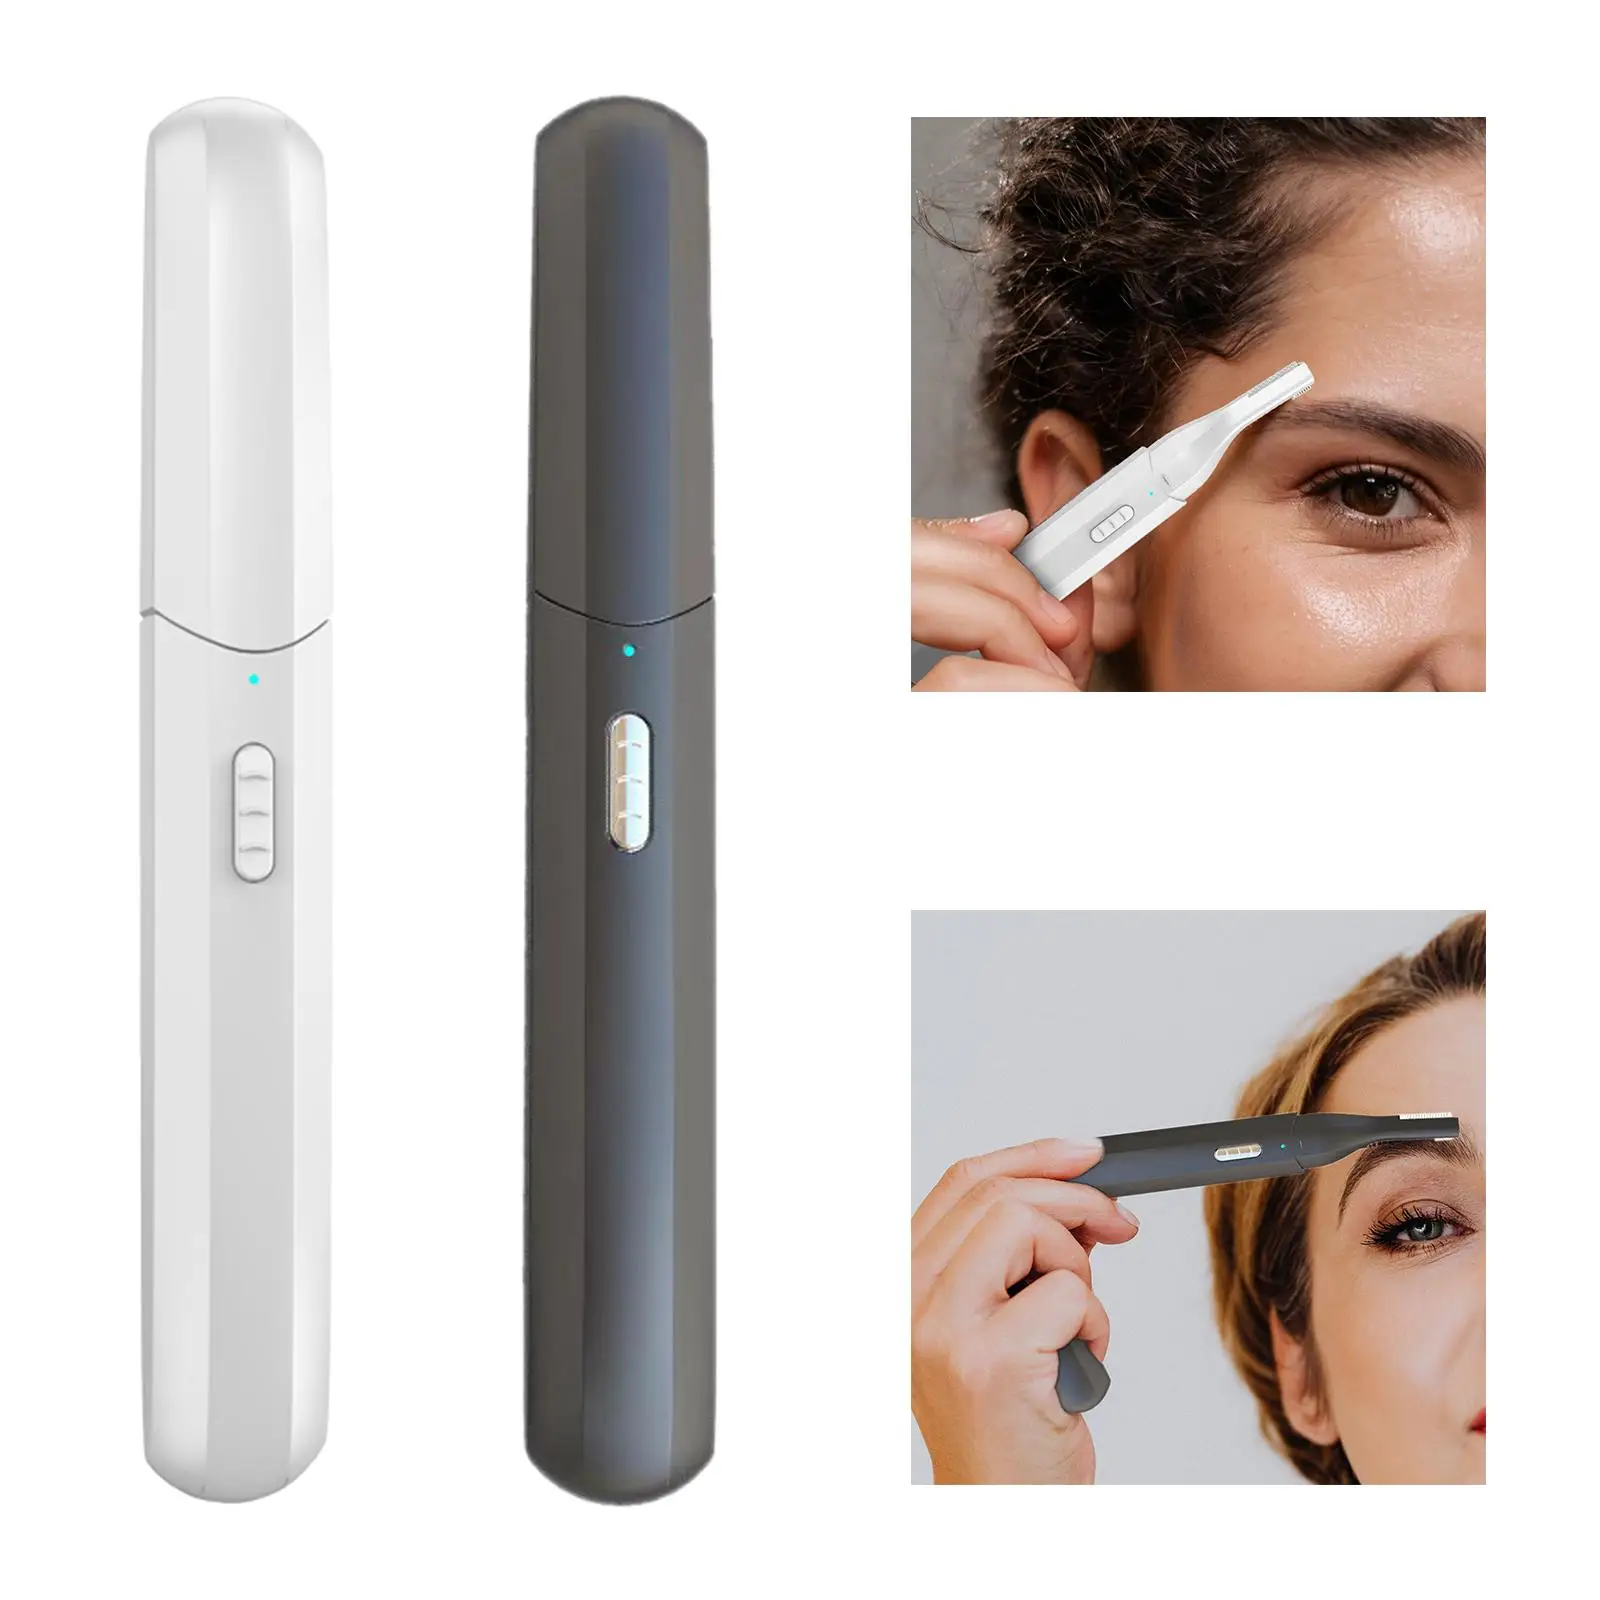 USB Charging Electric Eyebrow trimming Hair Remover Scrtachproof with Dual Cutter Head Portable for Lips Arms Legs